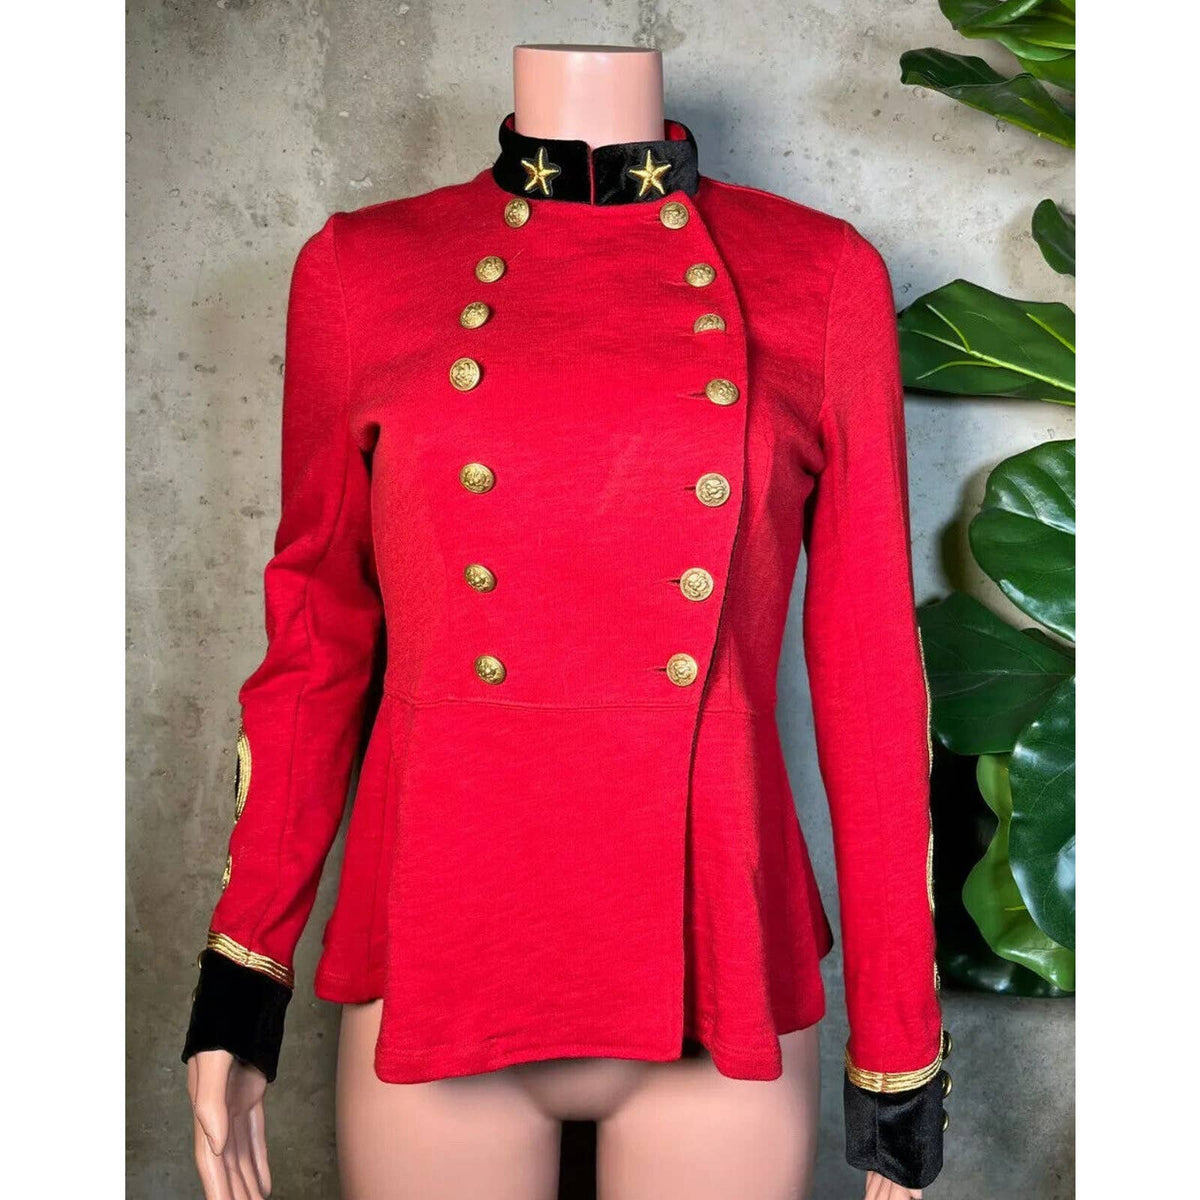 Denim &amp; Supply Ralph Laure Military Army Officer Red and Gold Jacket Sz. Medium